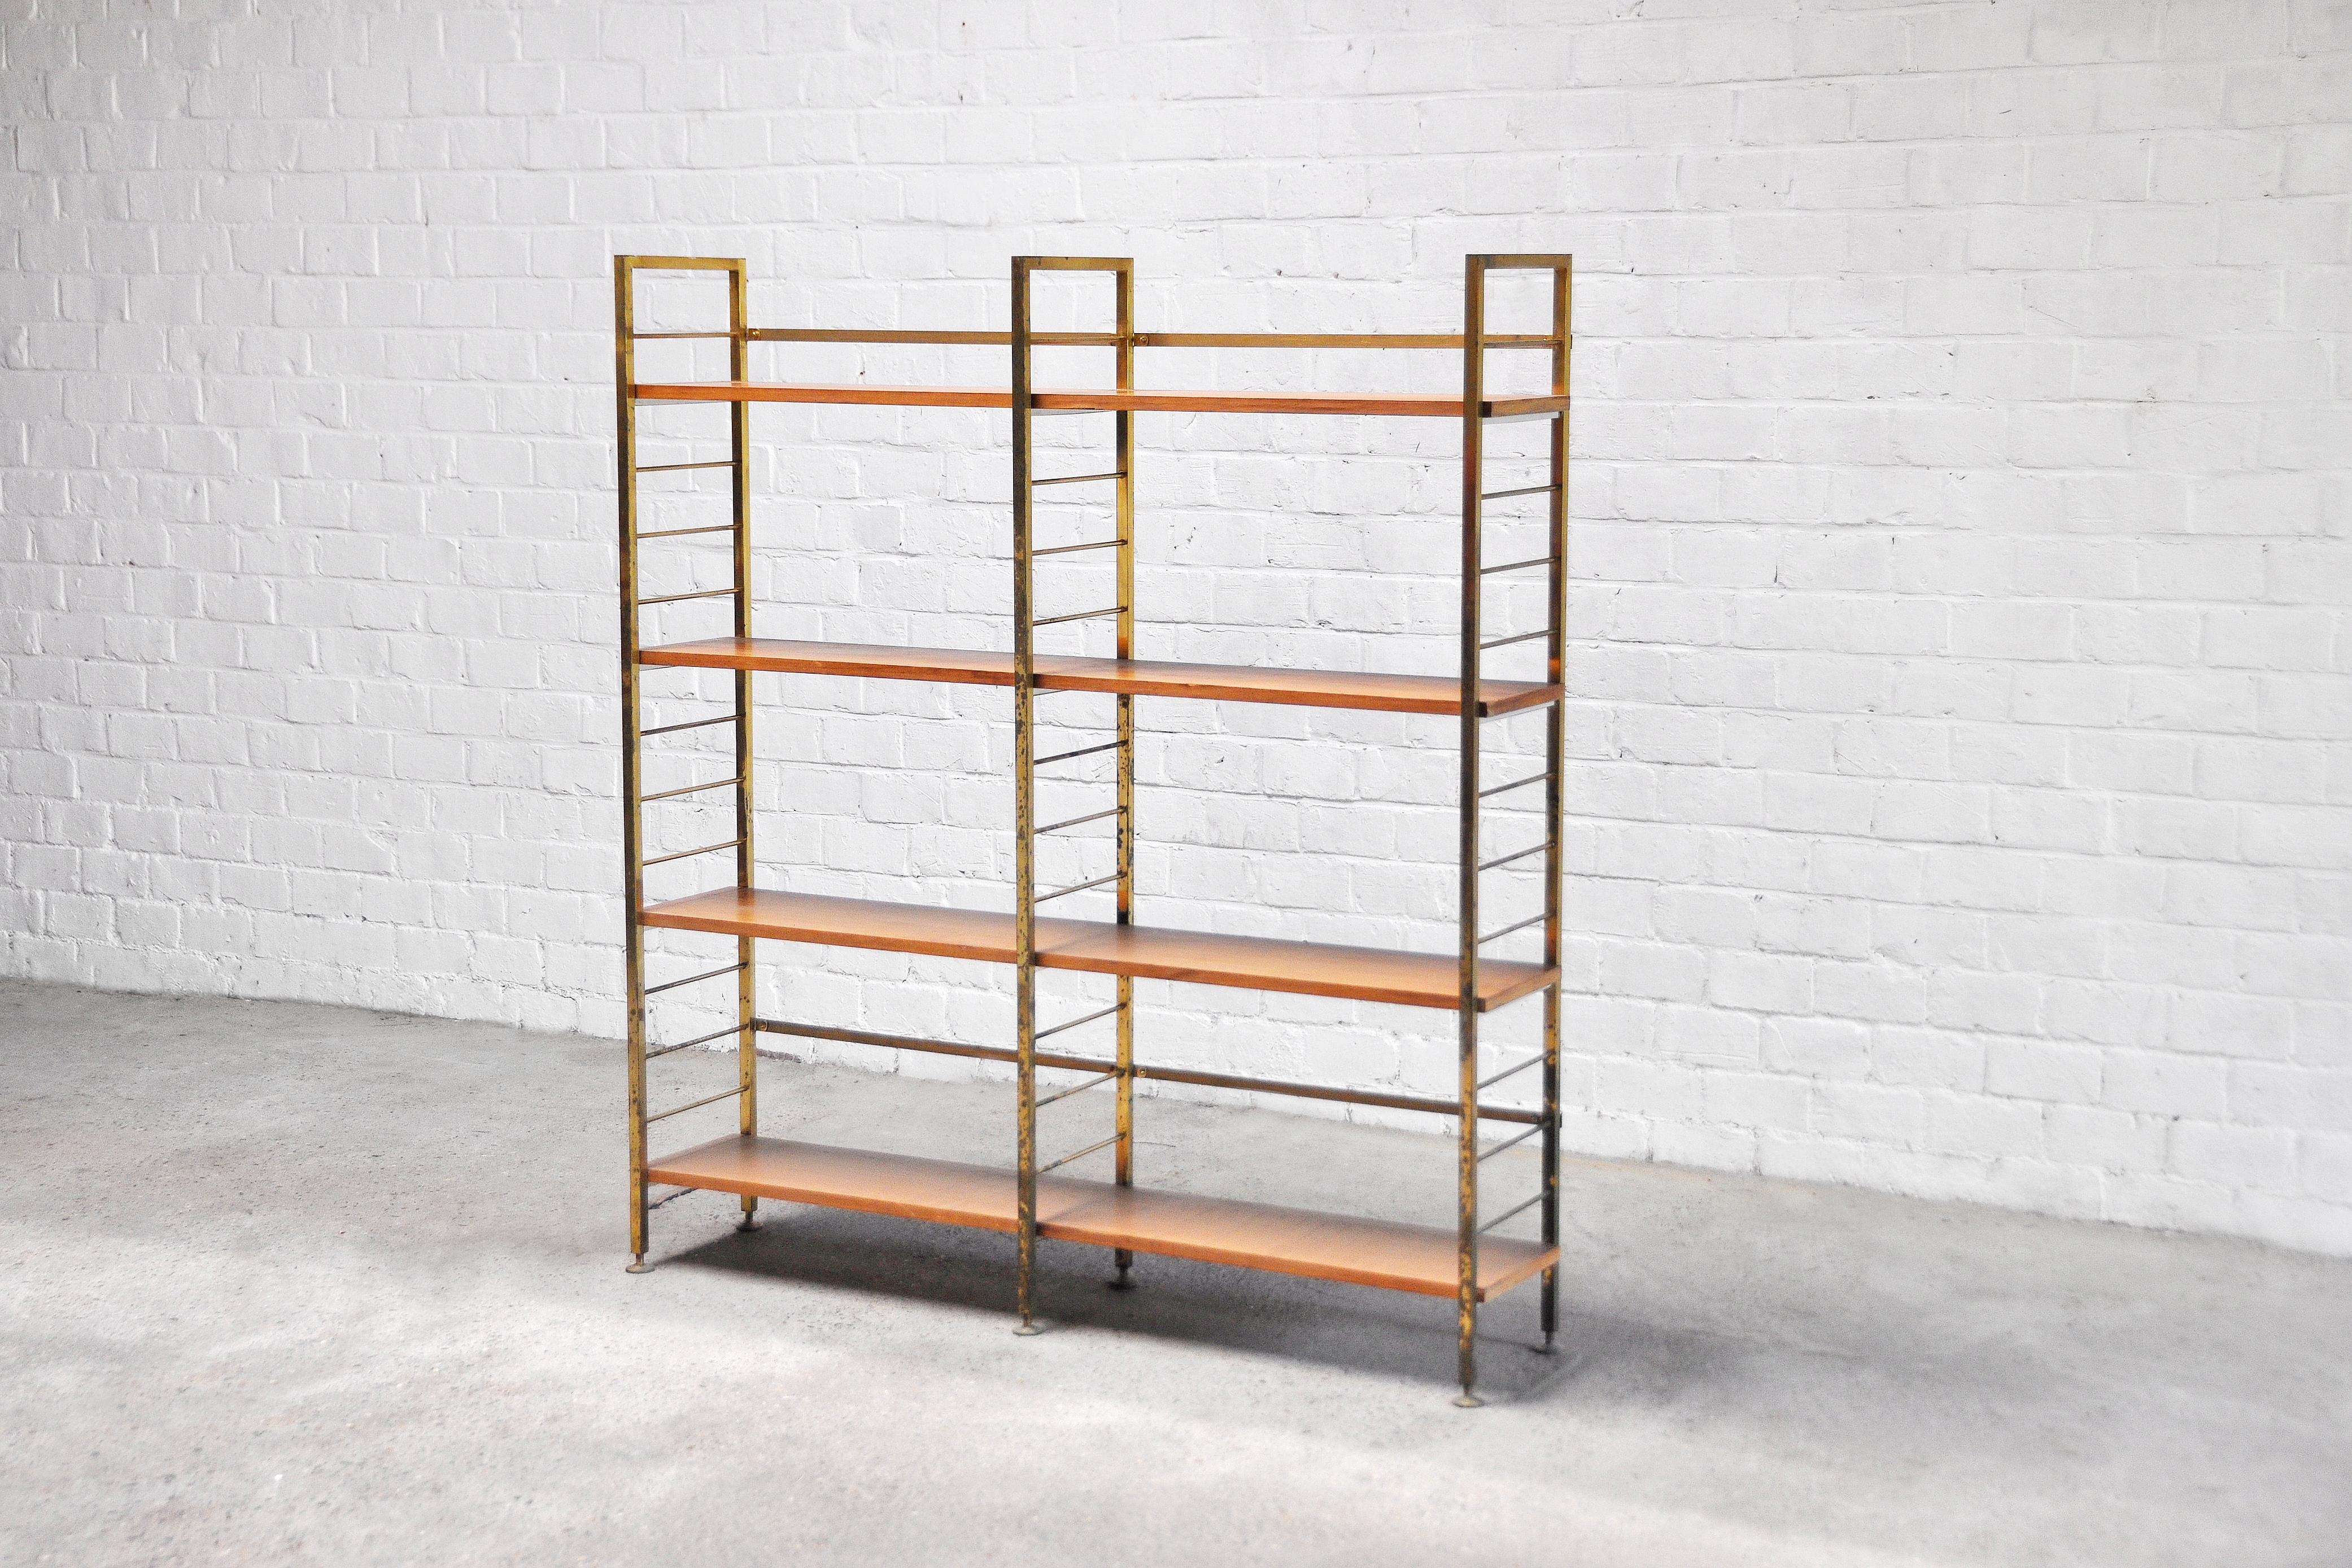 A unique 1960’s bookcase or shelving unit. Italian designer manufacturing, consisting out of a brass structure with wooden shelves. Wear consistent with age and use. Heavily patinated brass left intentionally in original condition. 